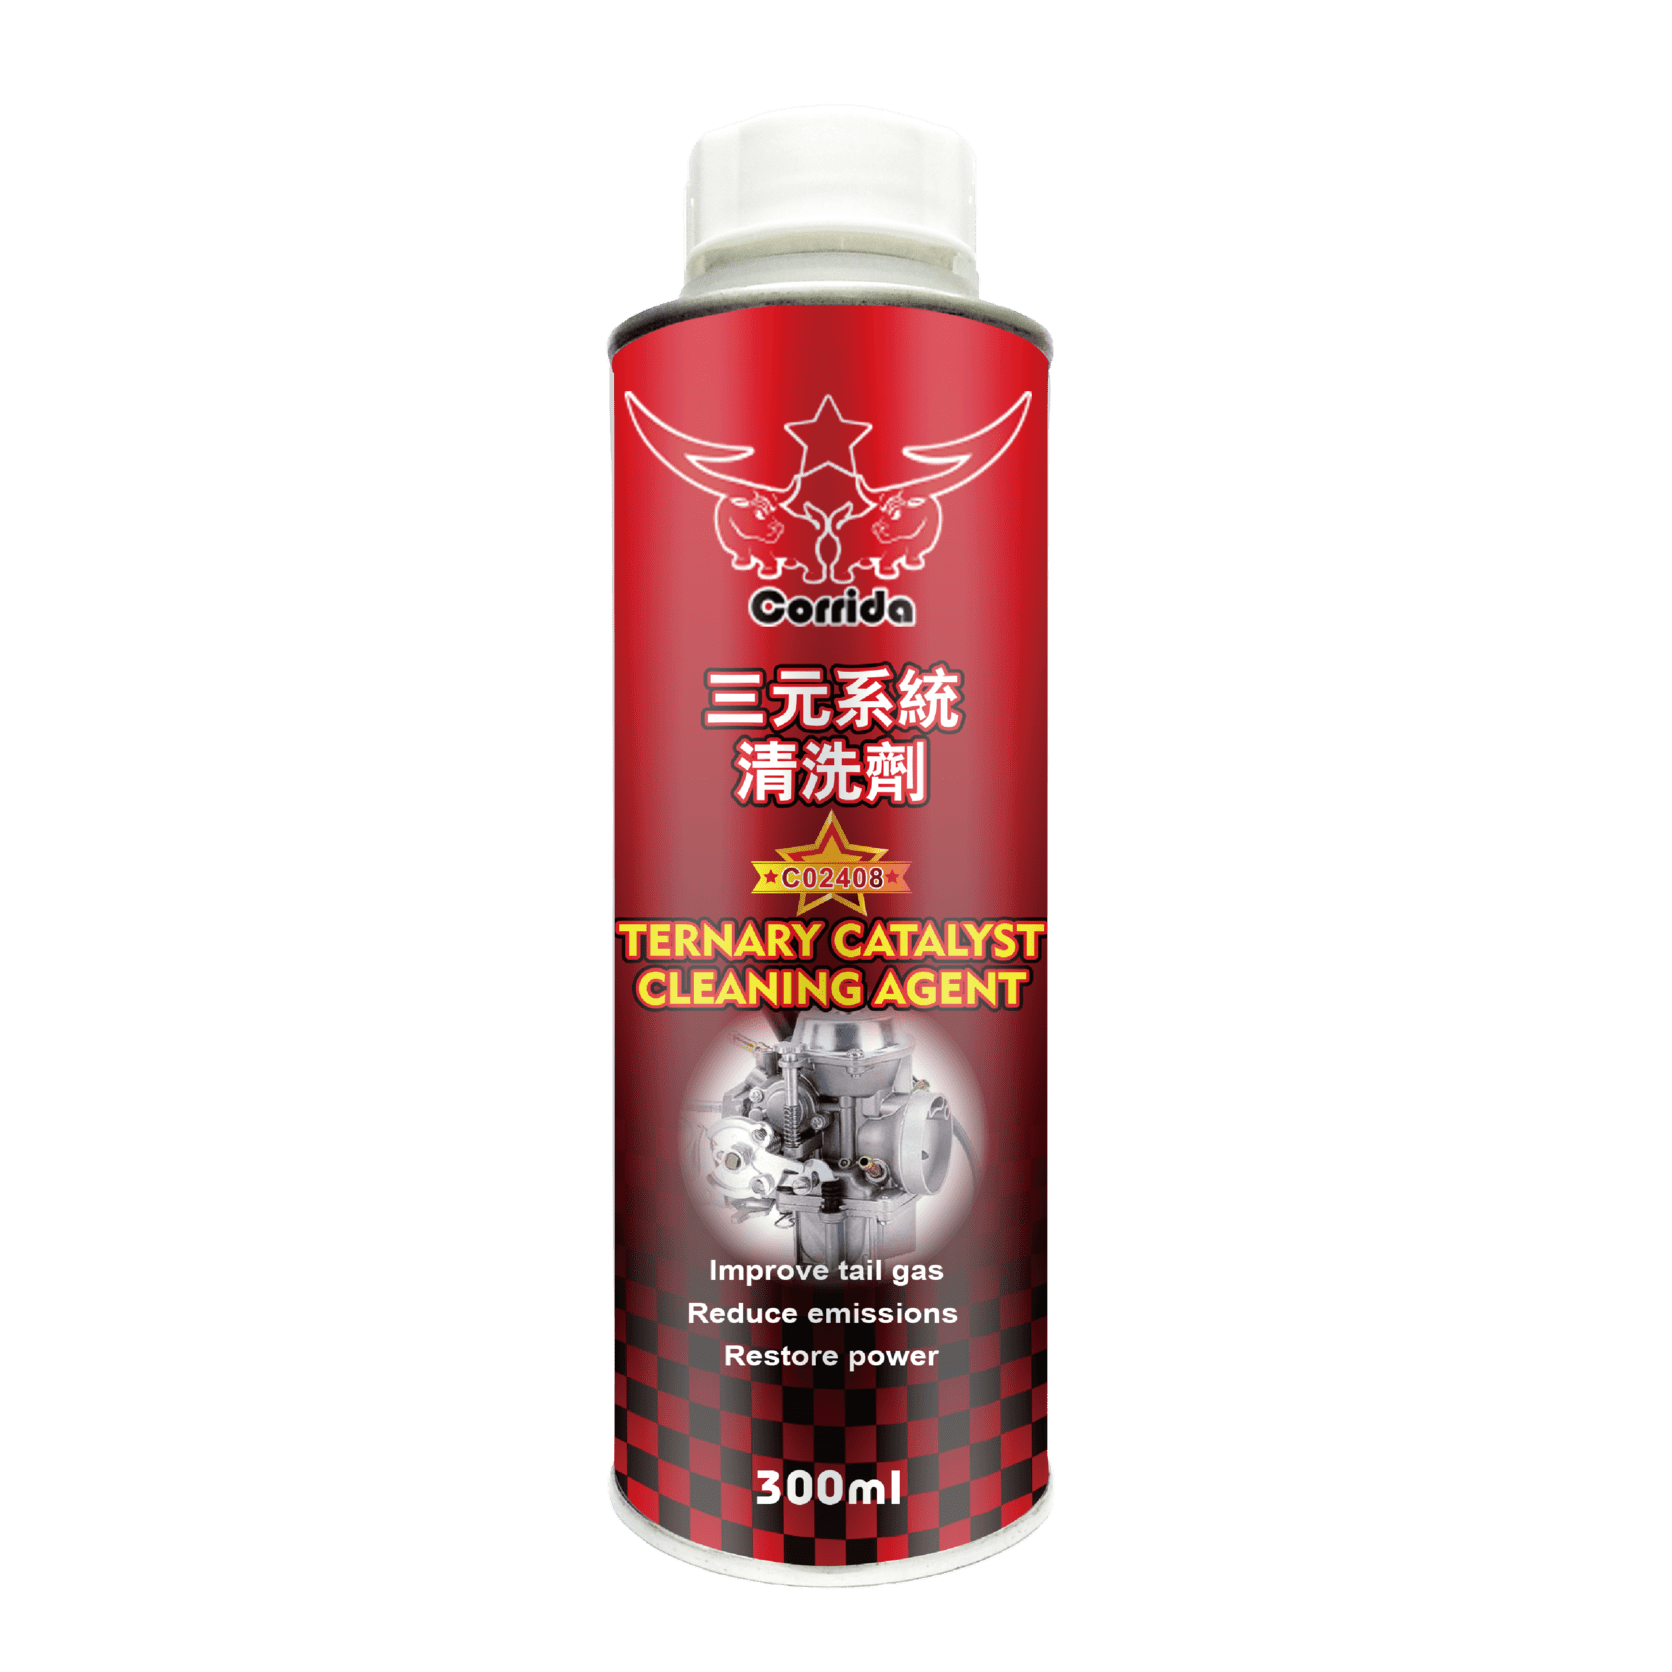 C02408 TERNARY CATALYST CLEANING AGENT